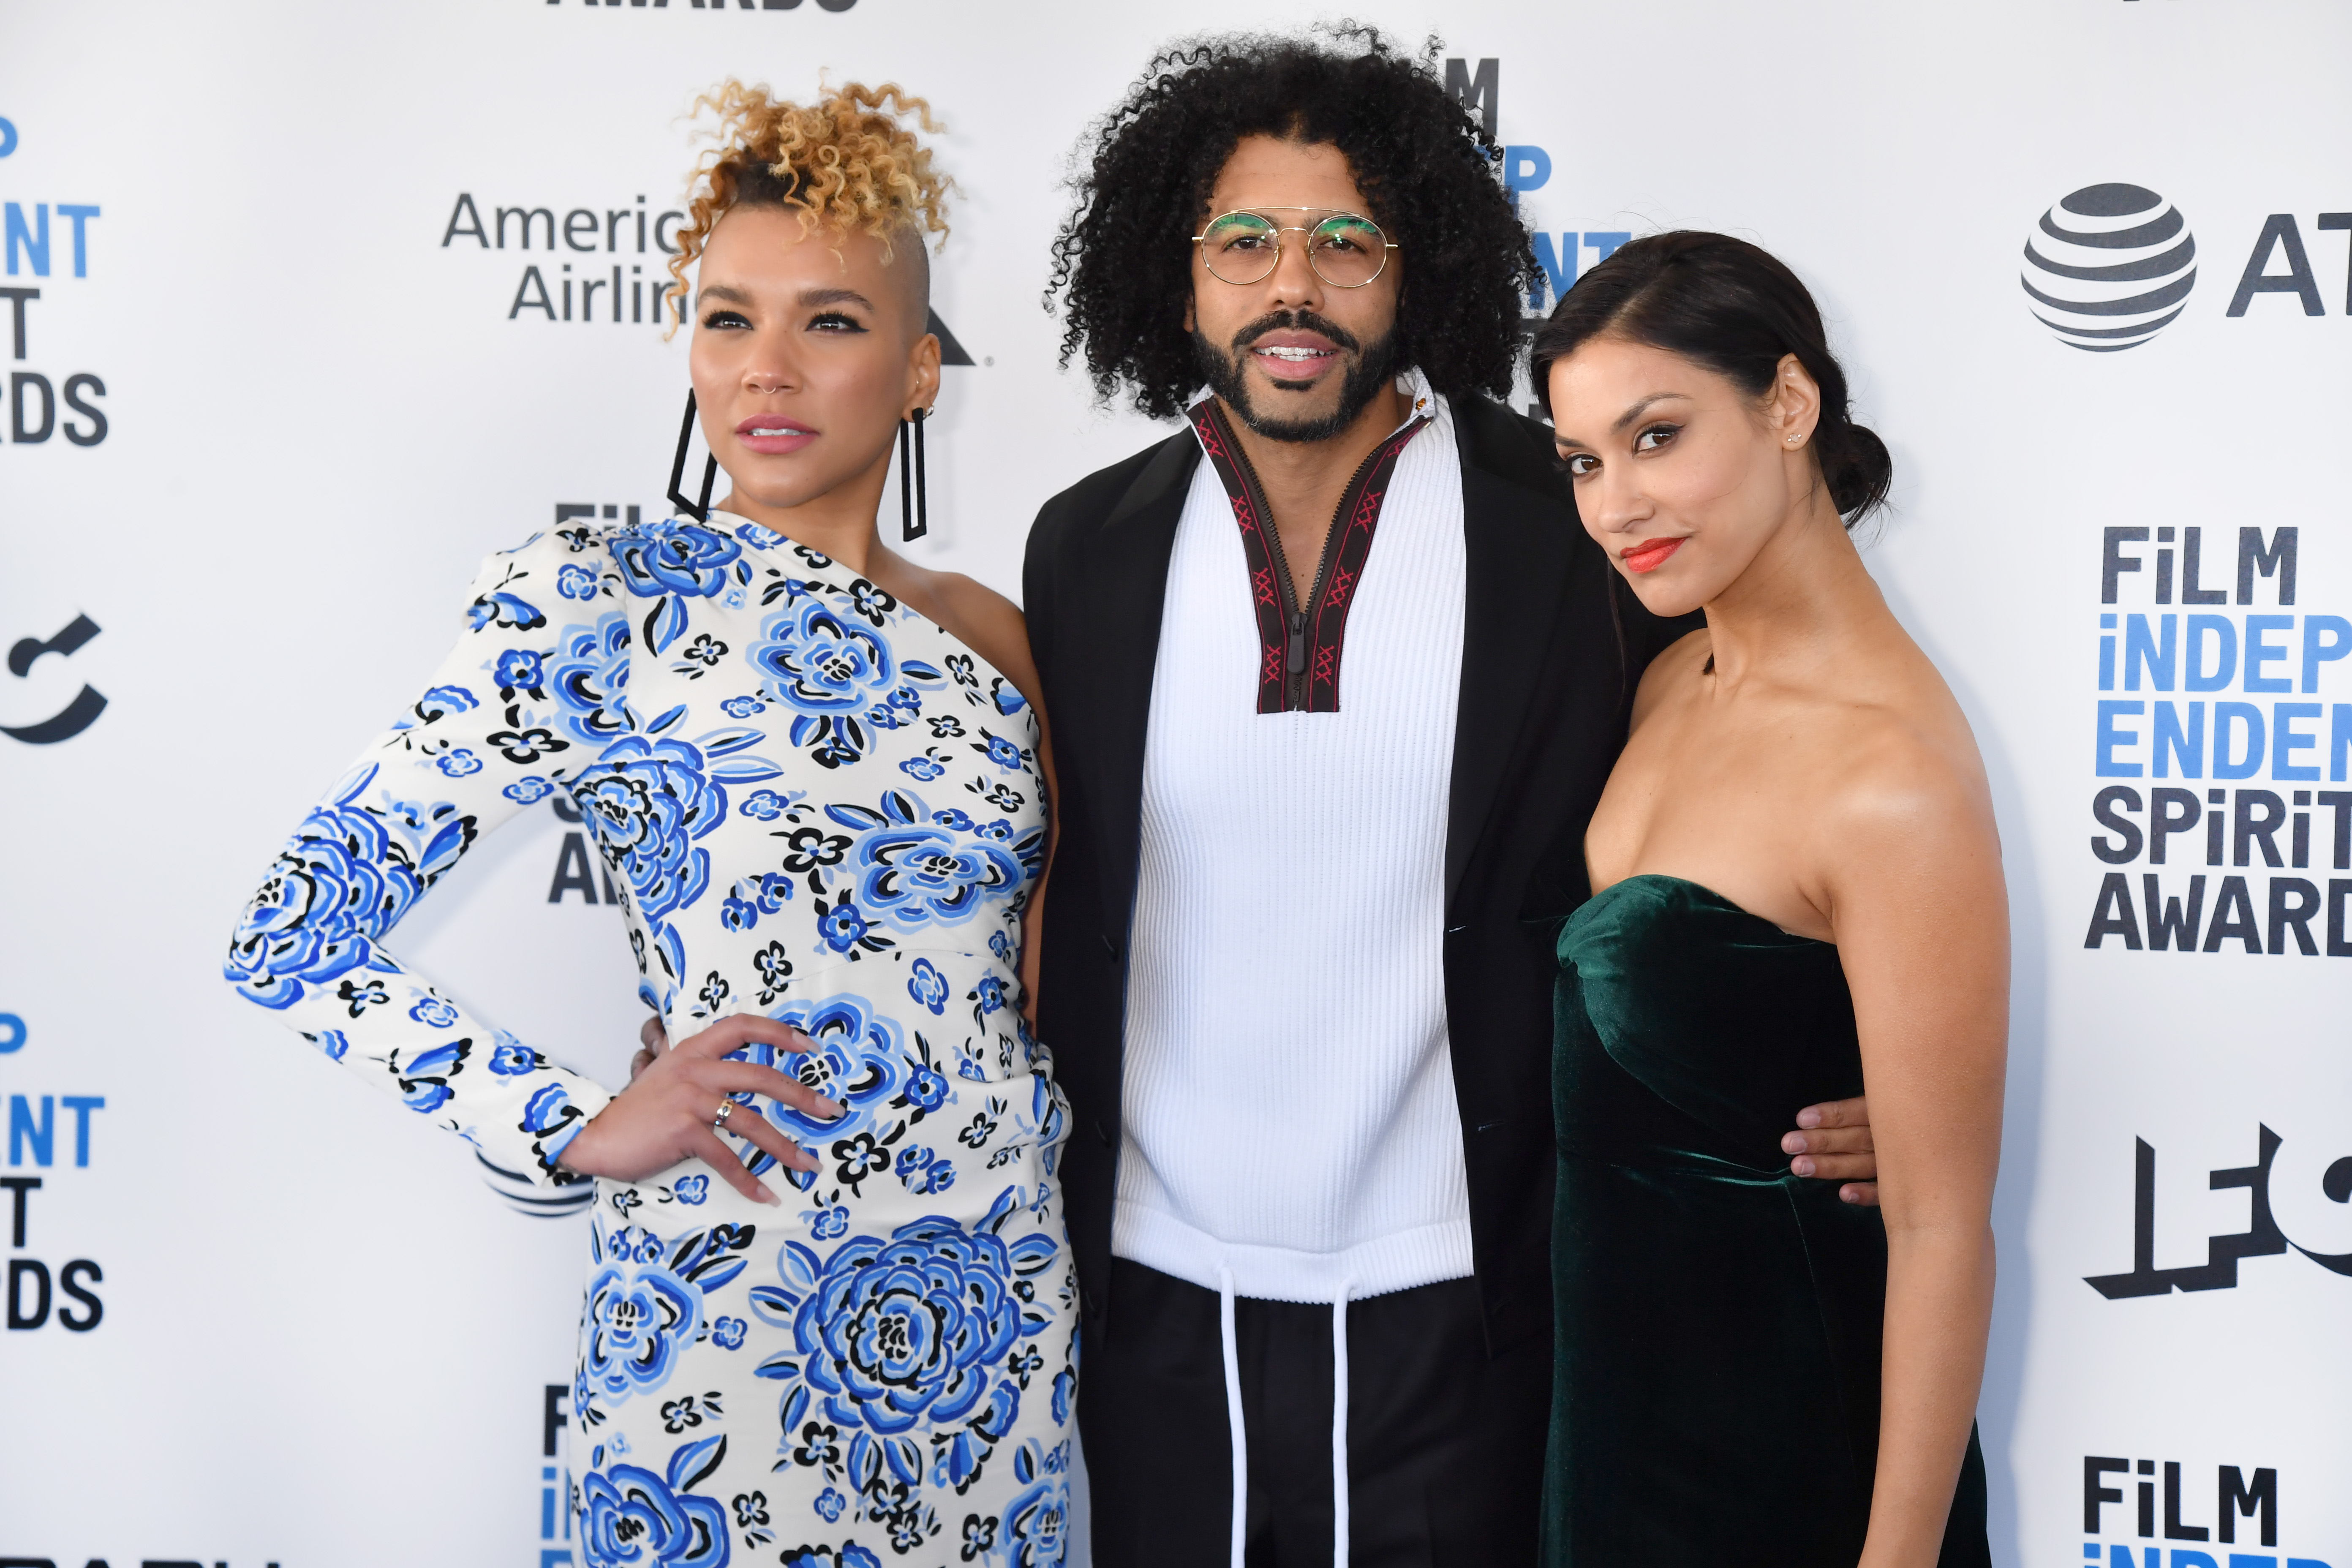 (L-R) Emmy Raver-Lampman, Daveed Diggs, and Janina Gavankar attend the 2019 Film Independent Spirit Awards, on February 23, 2019, in Santa Monica, California. | Source: Getty Images